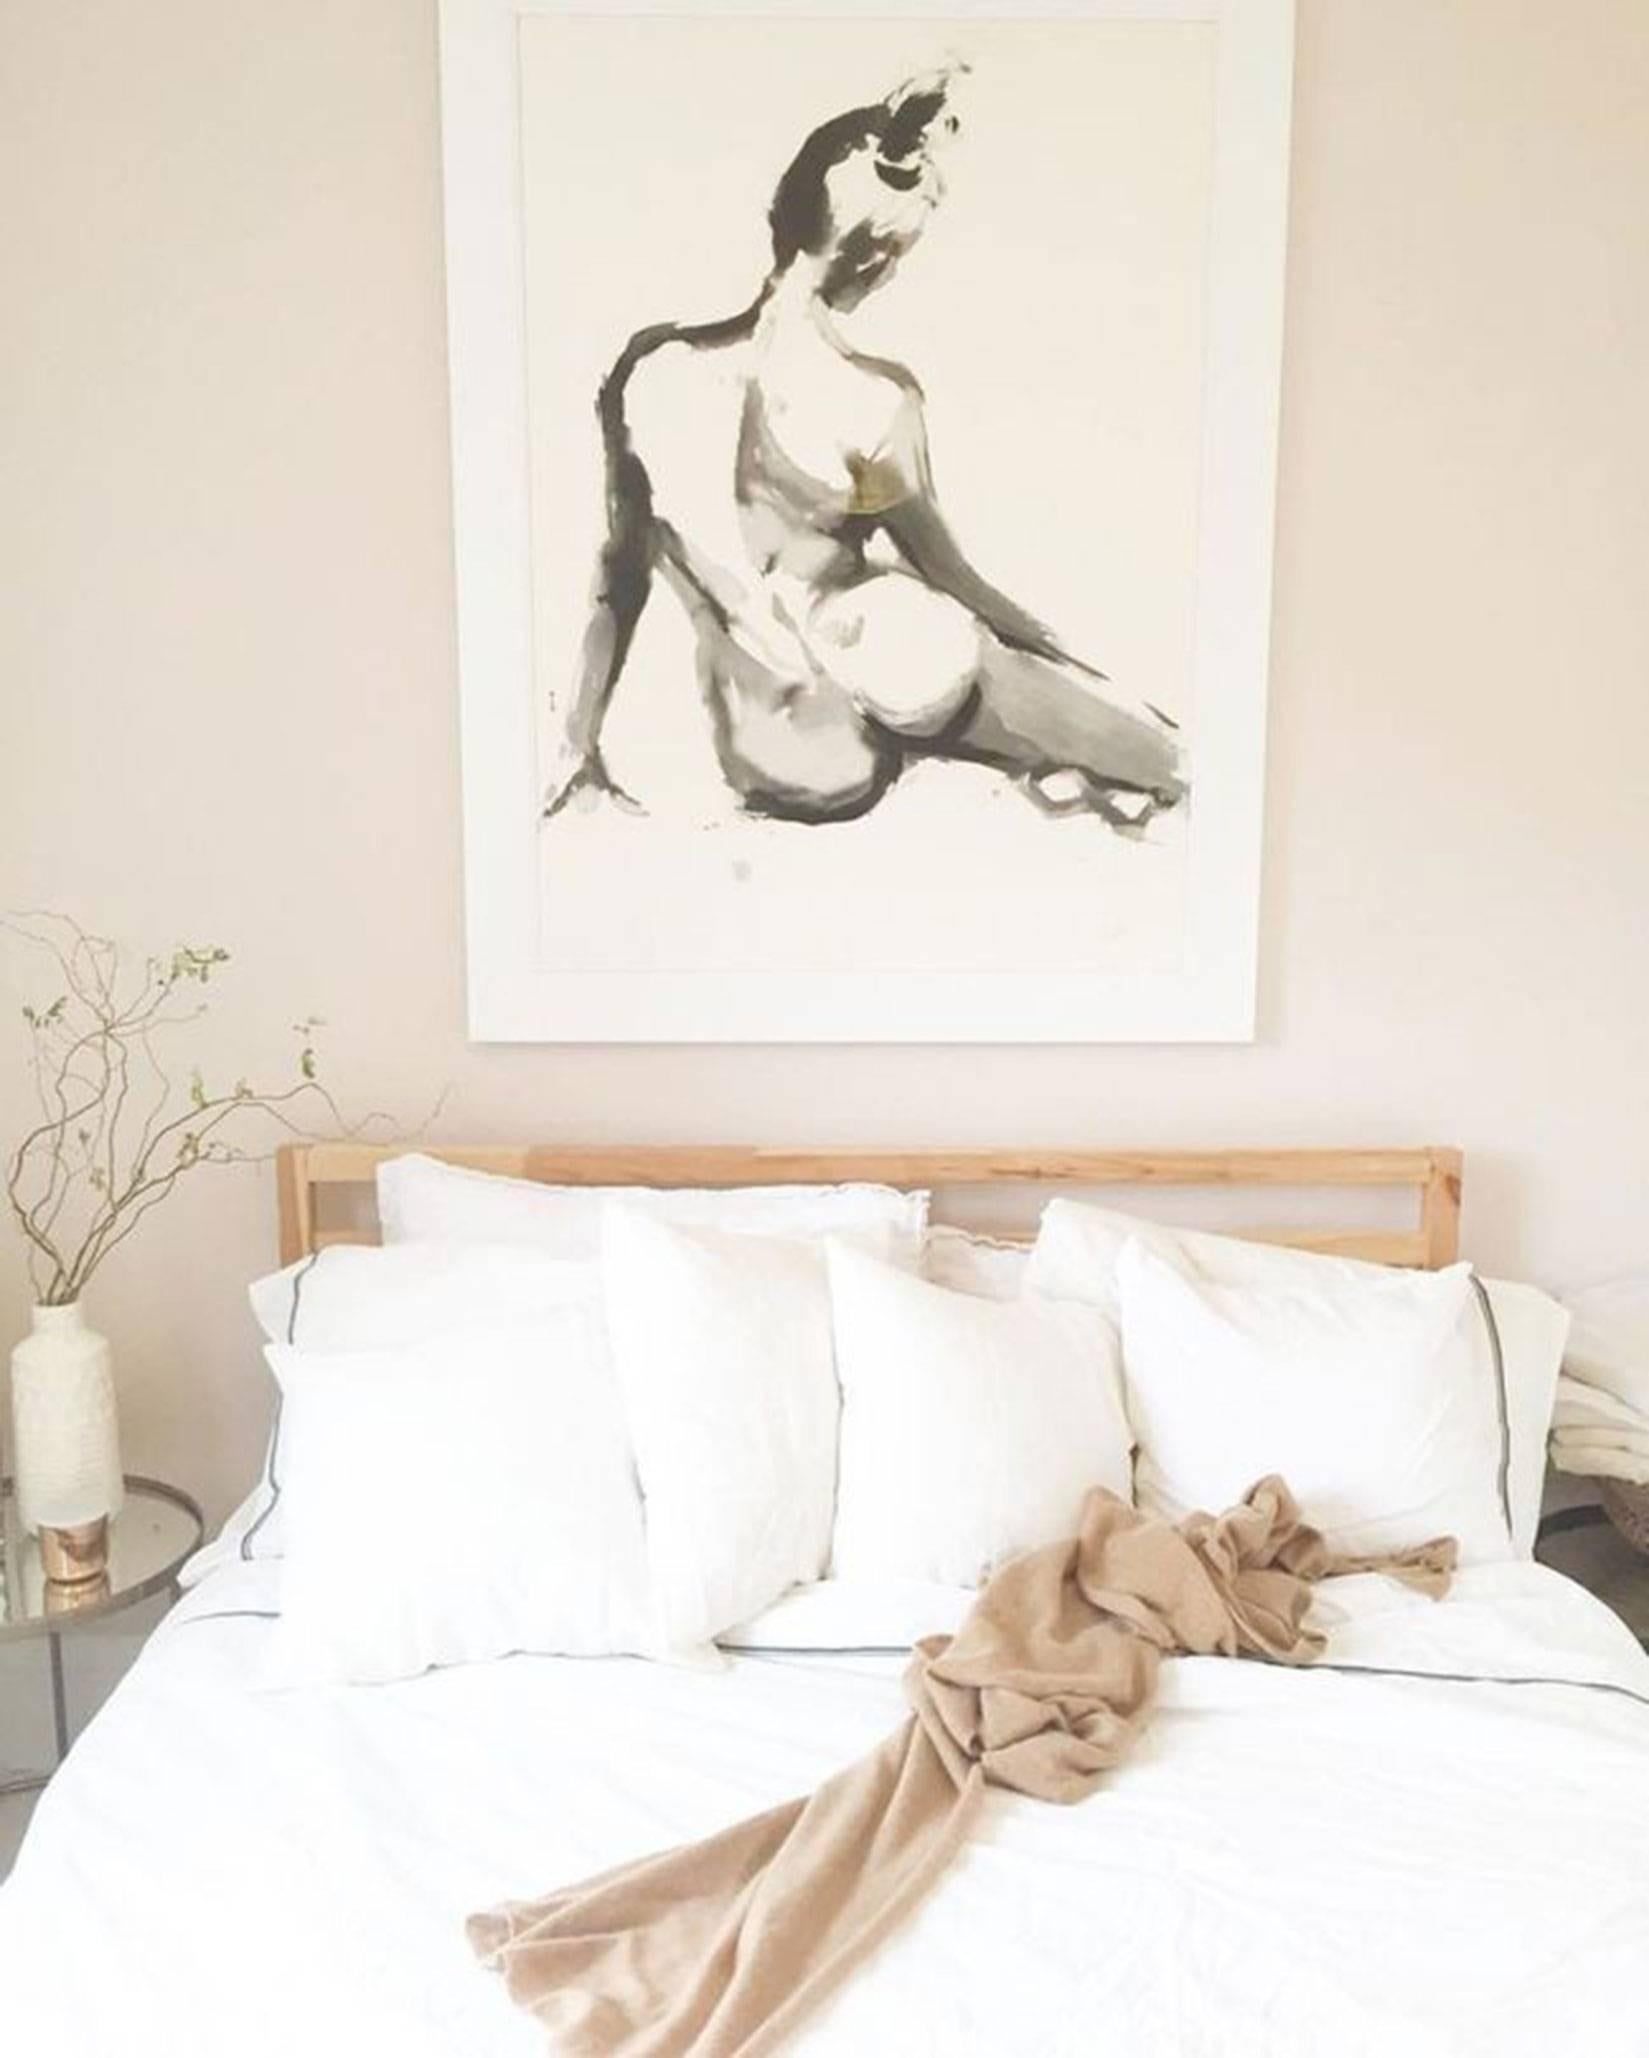 Charcoal on paper nude drawing; titled: ‘Meditation’ signed by the artist lower right corner: Fiona MacPherson. A perfect reflection of the Meghan Markle effect! Decorate and enhance your home like royalty with this beautiful nude charcoal drawing.